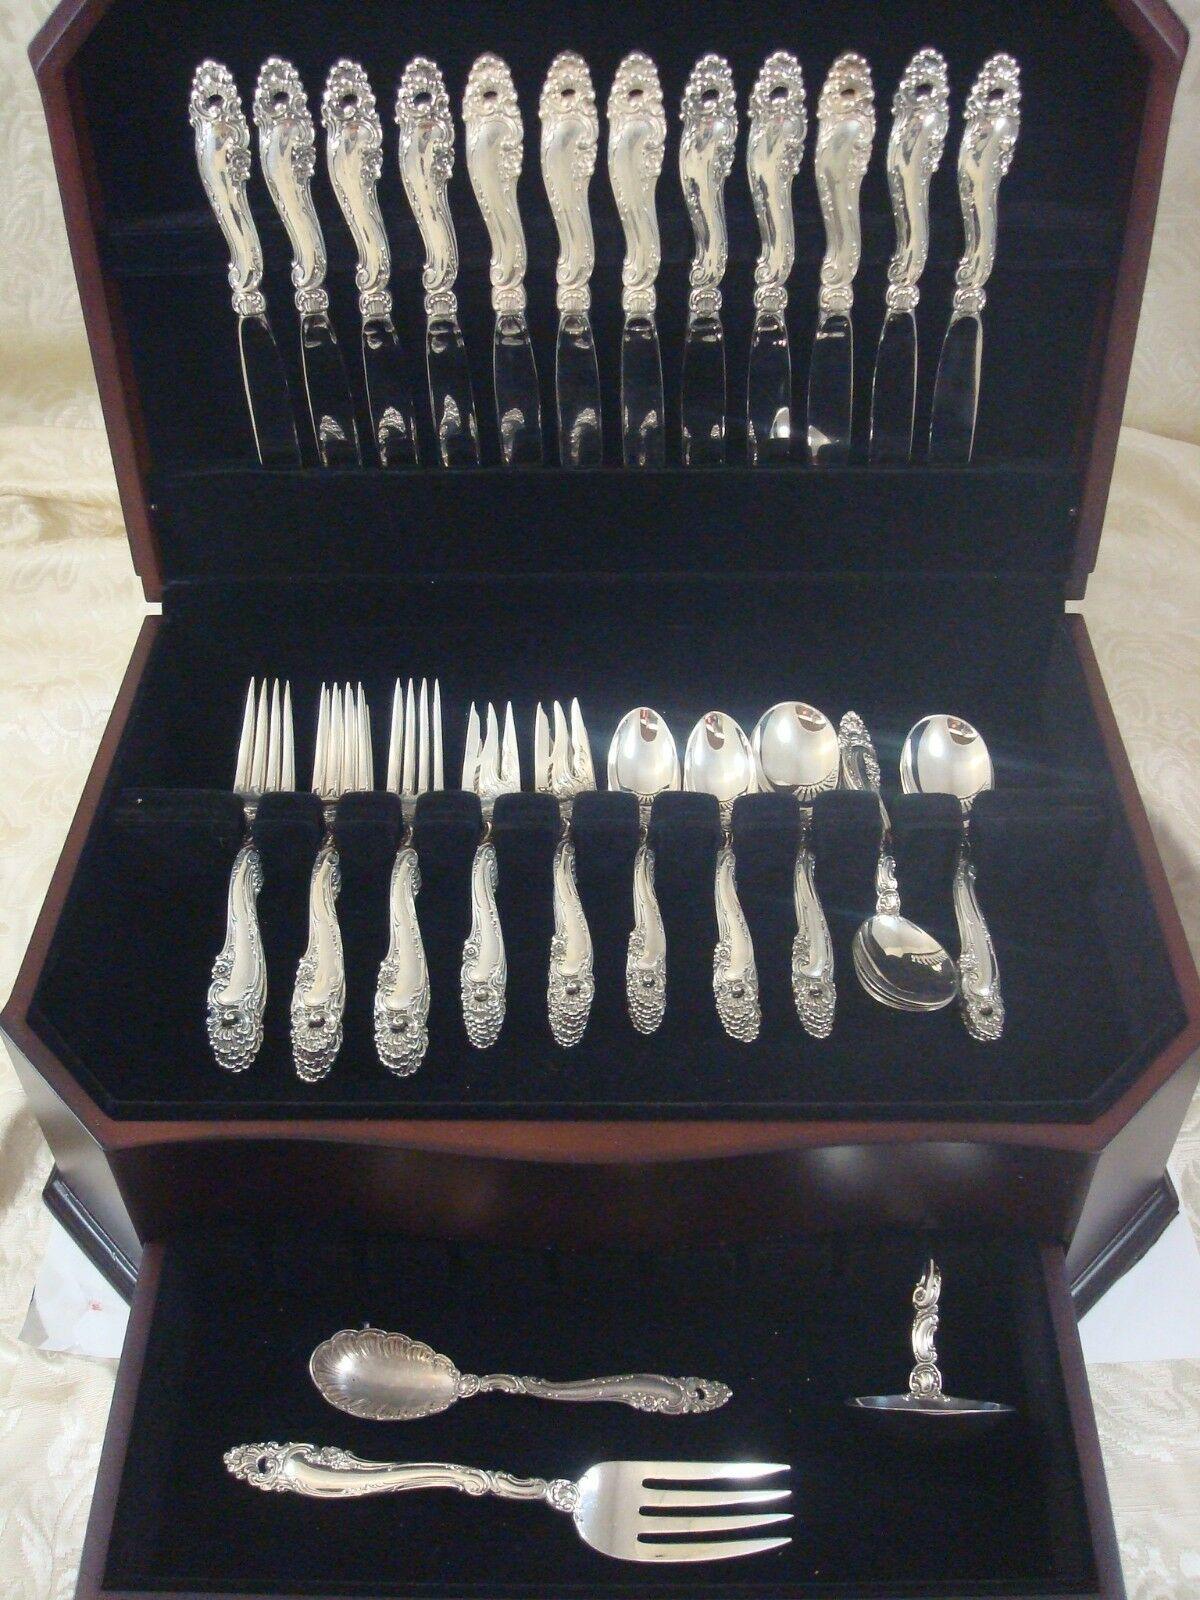 Dinner size Decor by Gorham sterling silver Flatware set - 63 Pieces. This pattern is heavy and features rococo swirls, shells, & small flowers. This set includes:

12 dinner knives, 9 5/8